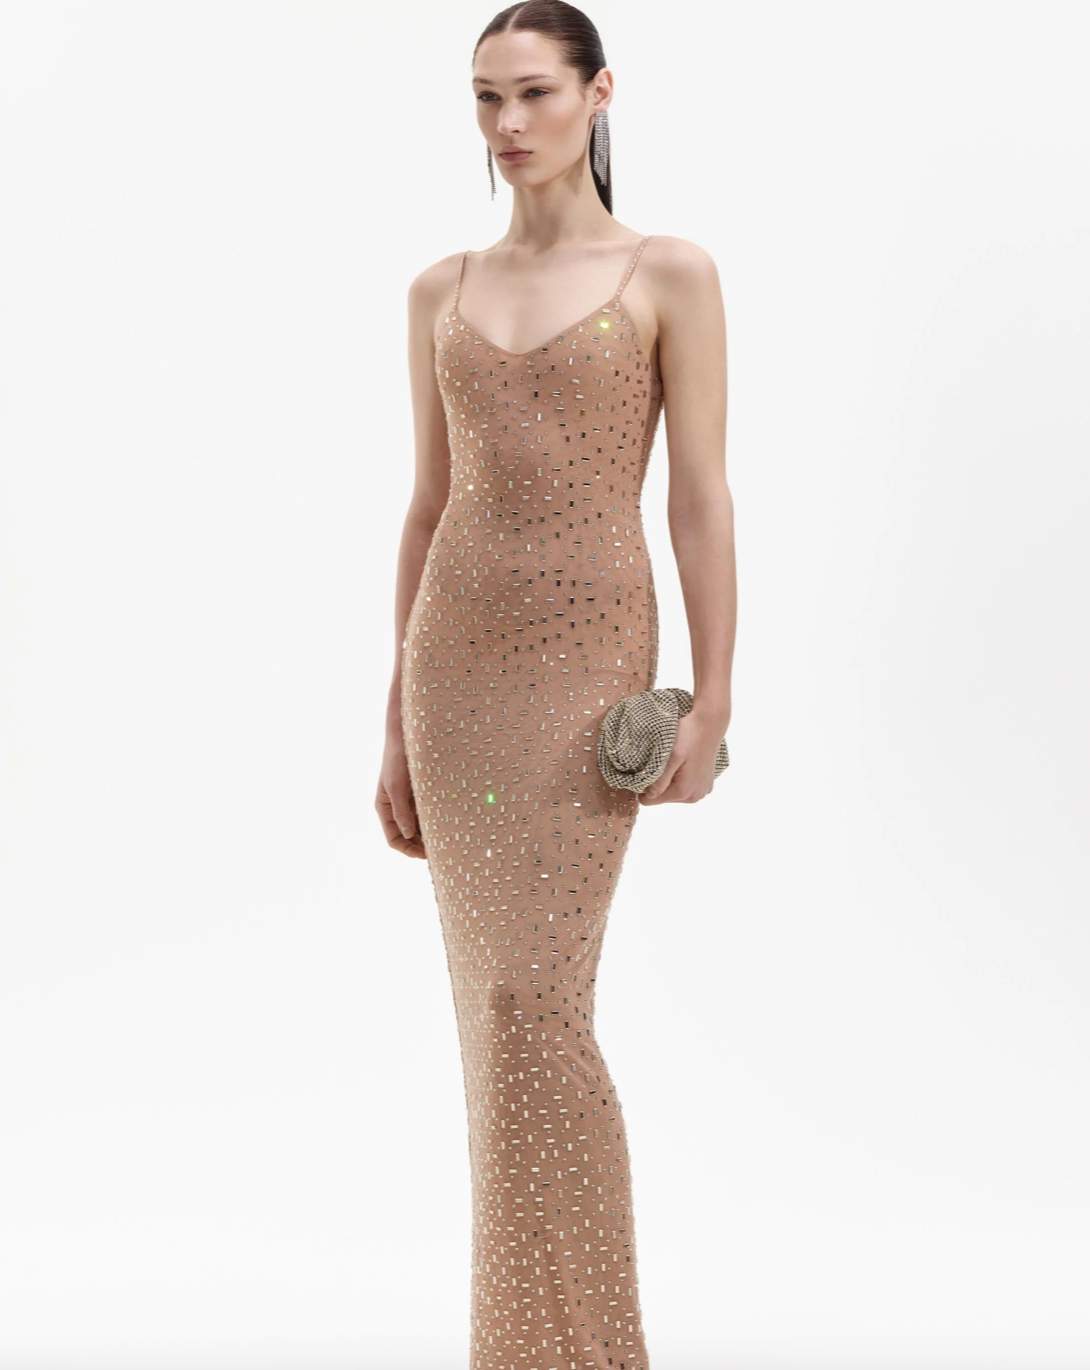 This stunning GOLD SQUARE RHINESTONE MESH MAXI DRESS features a sparkling mesh material adorned with intricate square rhinestones, making it the perfect dress for any glamorous occasion. Stand out while feeling luxurious and elegant in this exquisite and eye-catching dress.